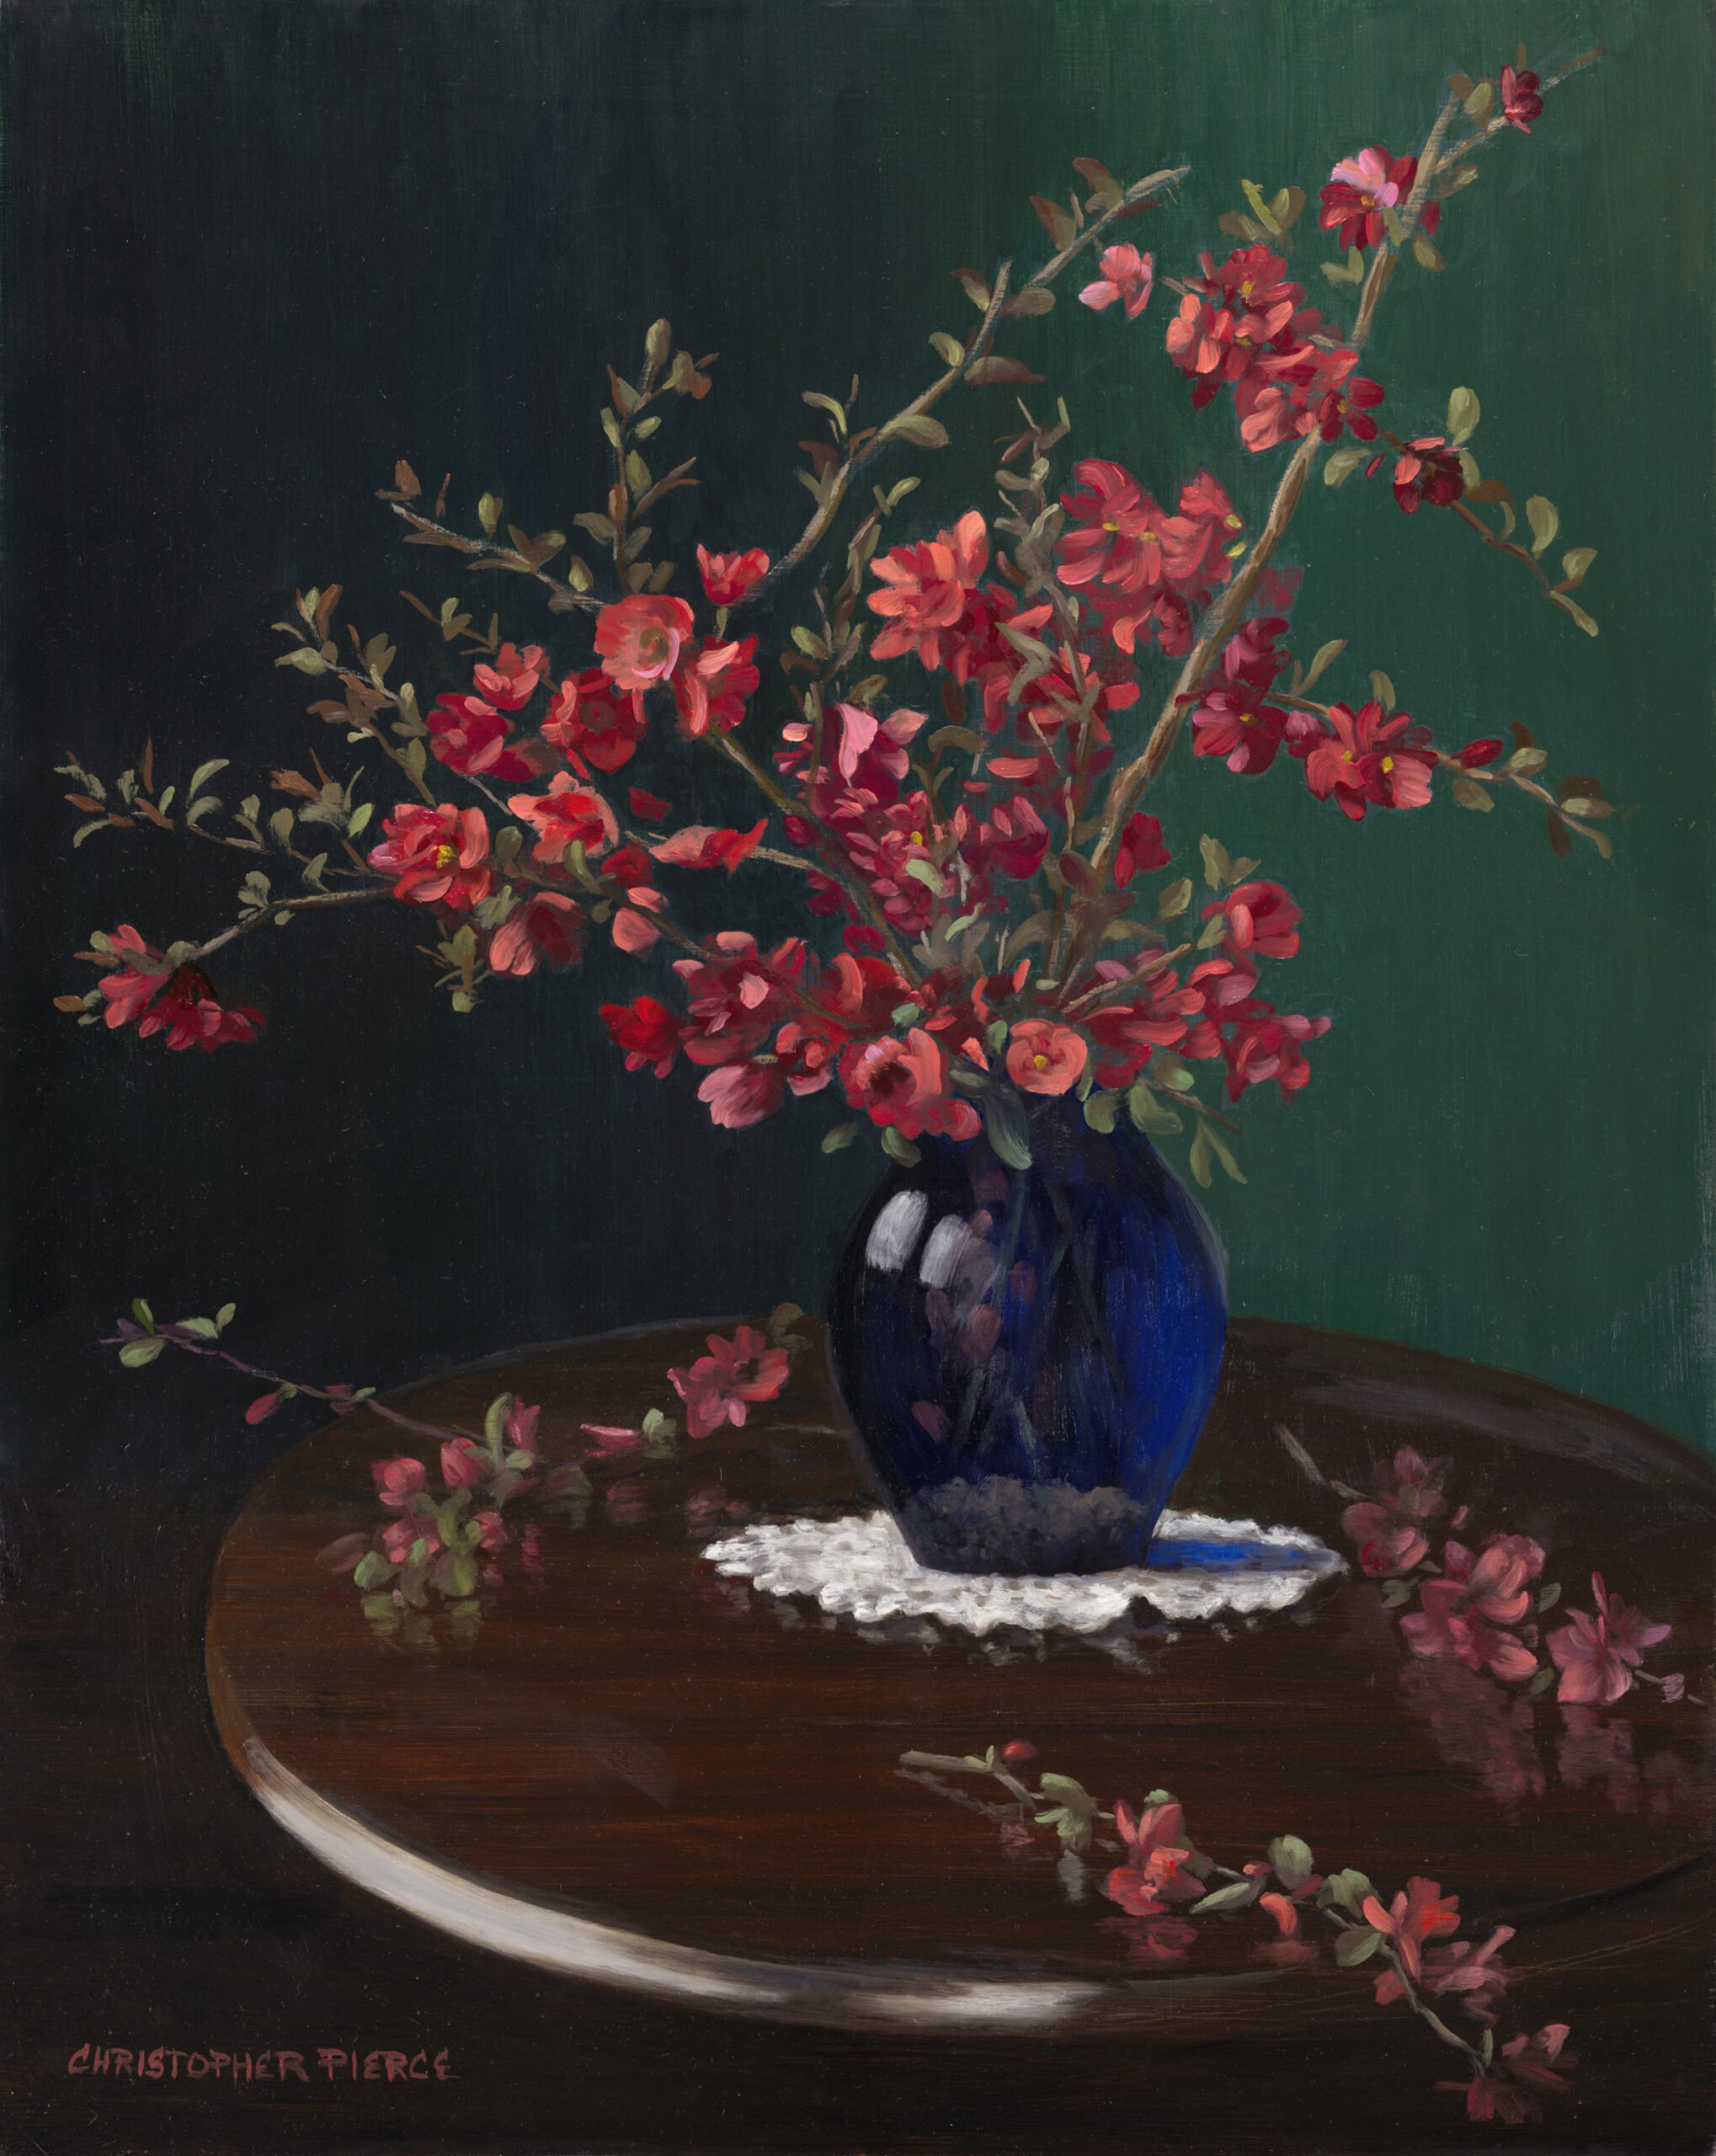 a painting of red flowers in a blue vase.